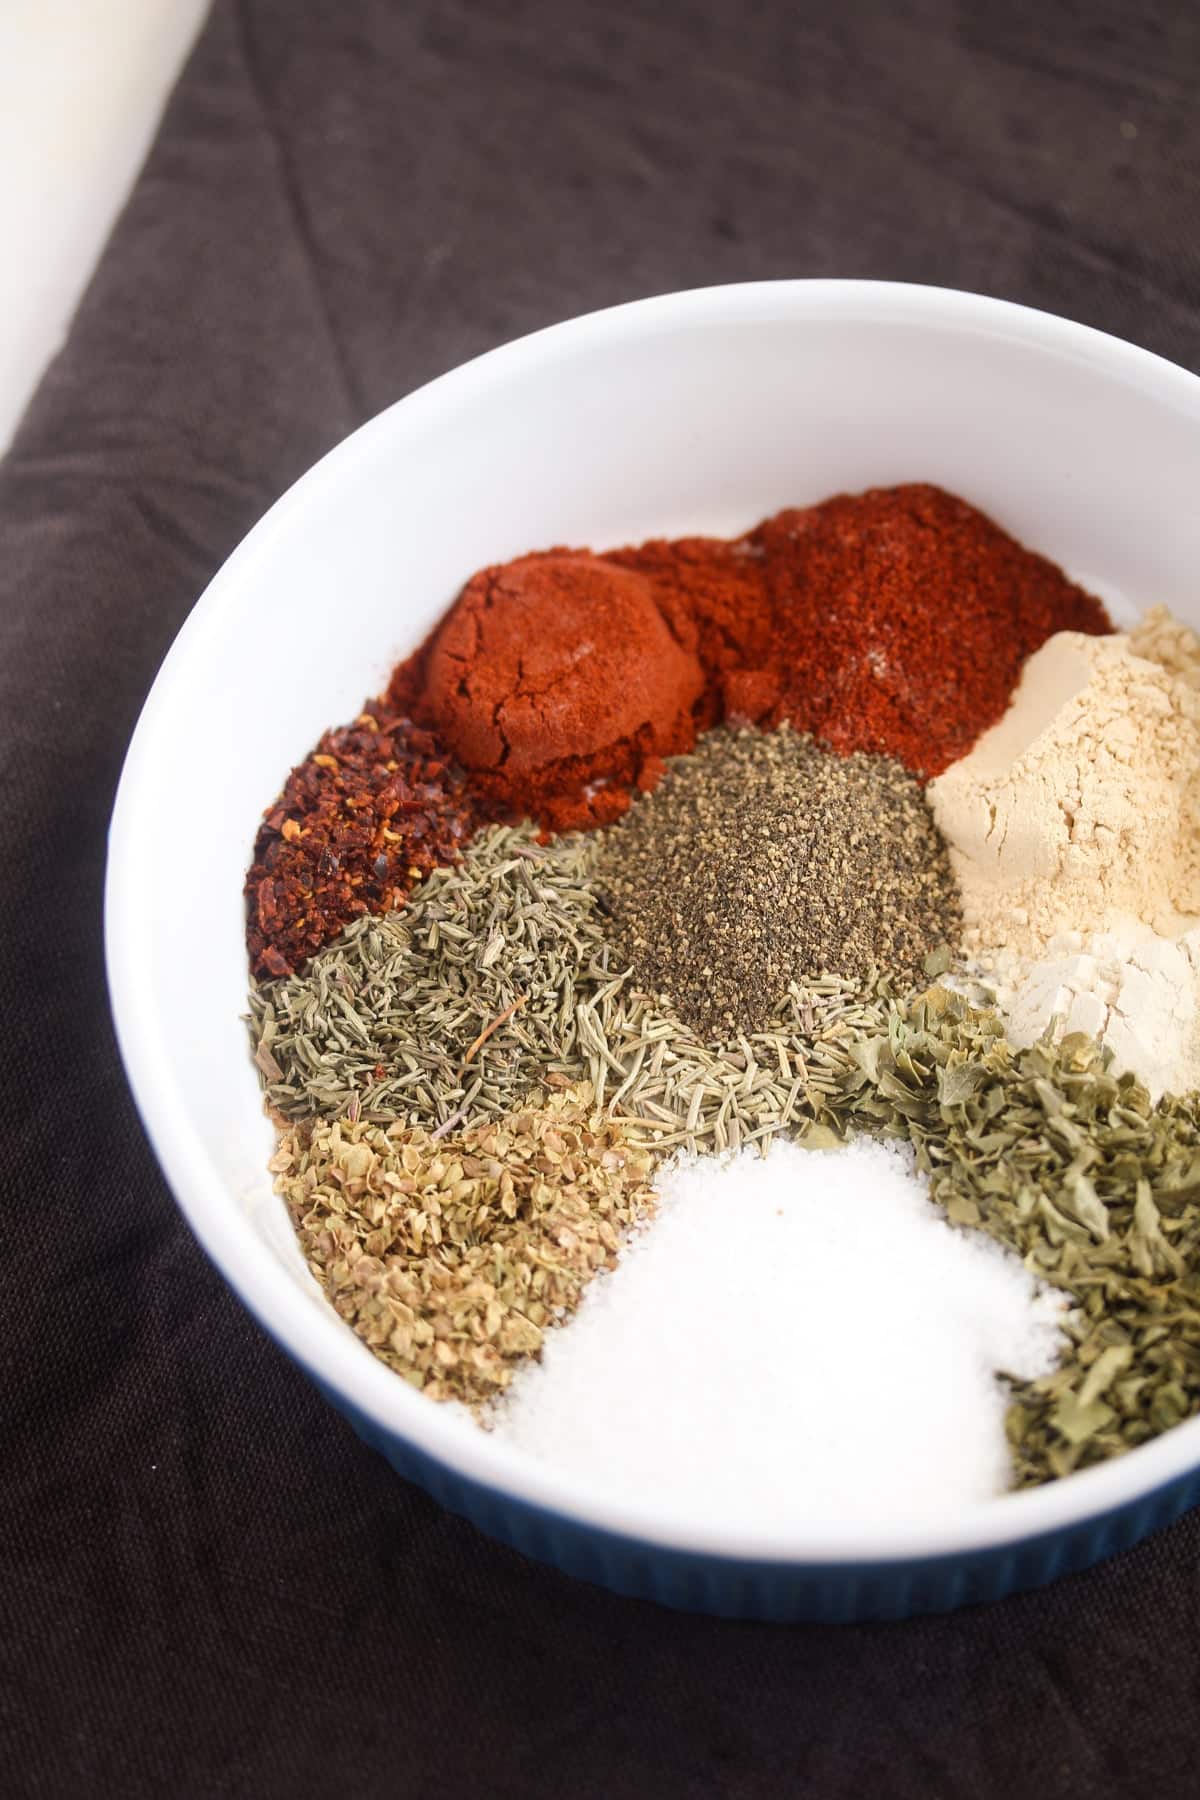 many spices for making homemade seasoning in a small white bowl.